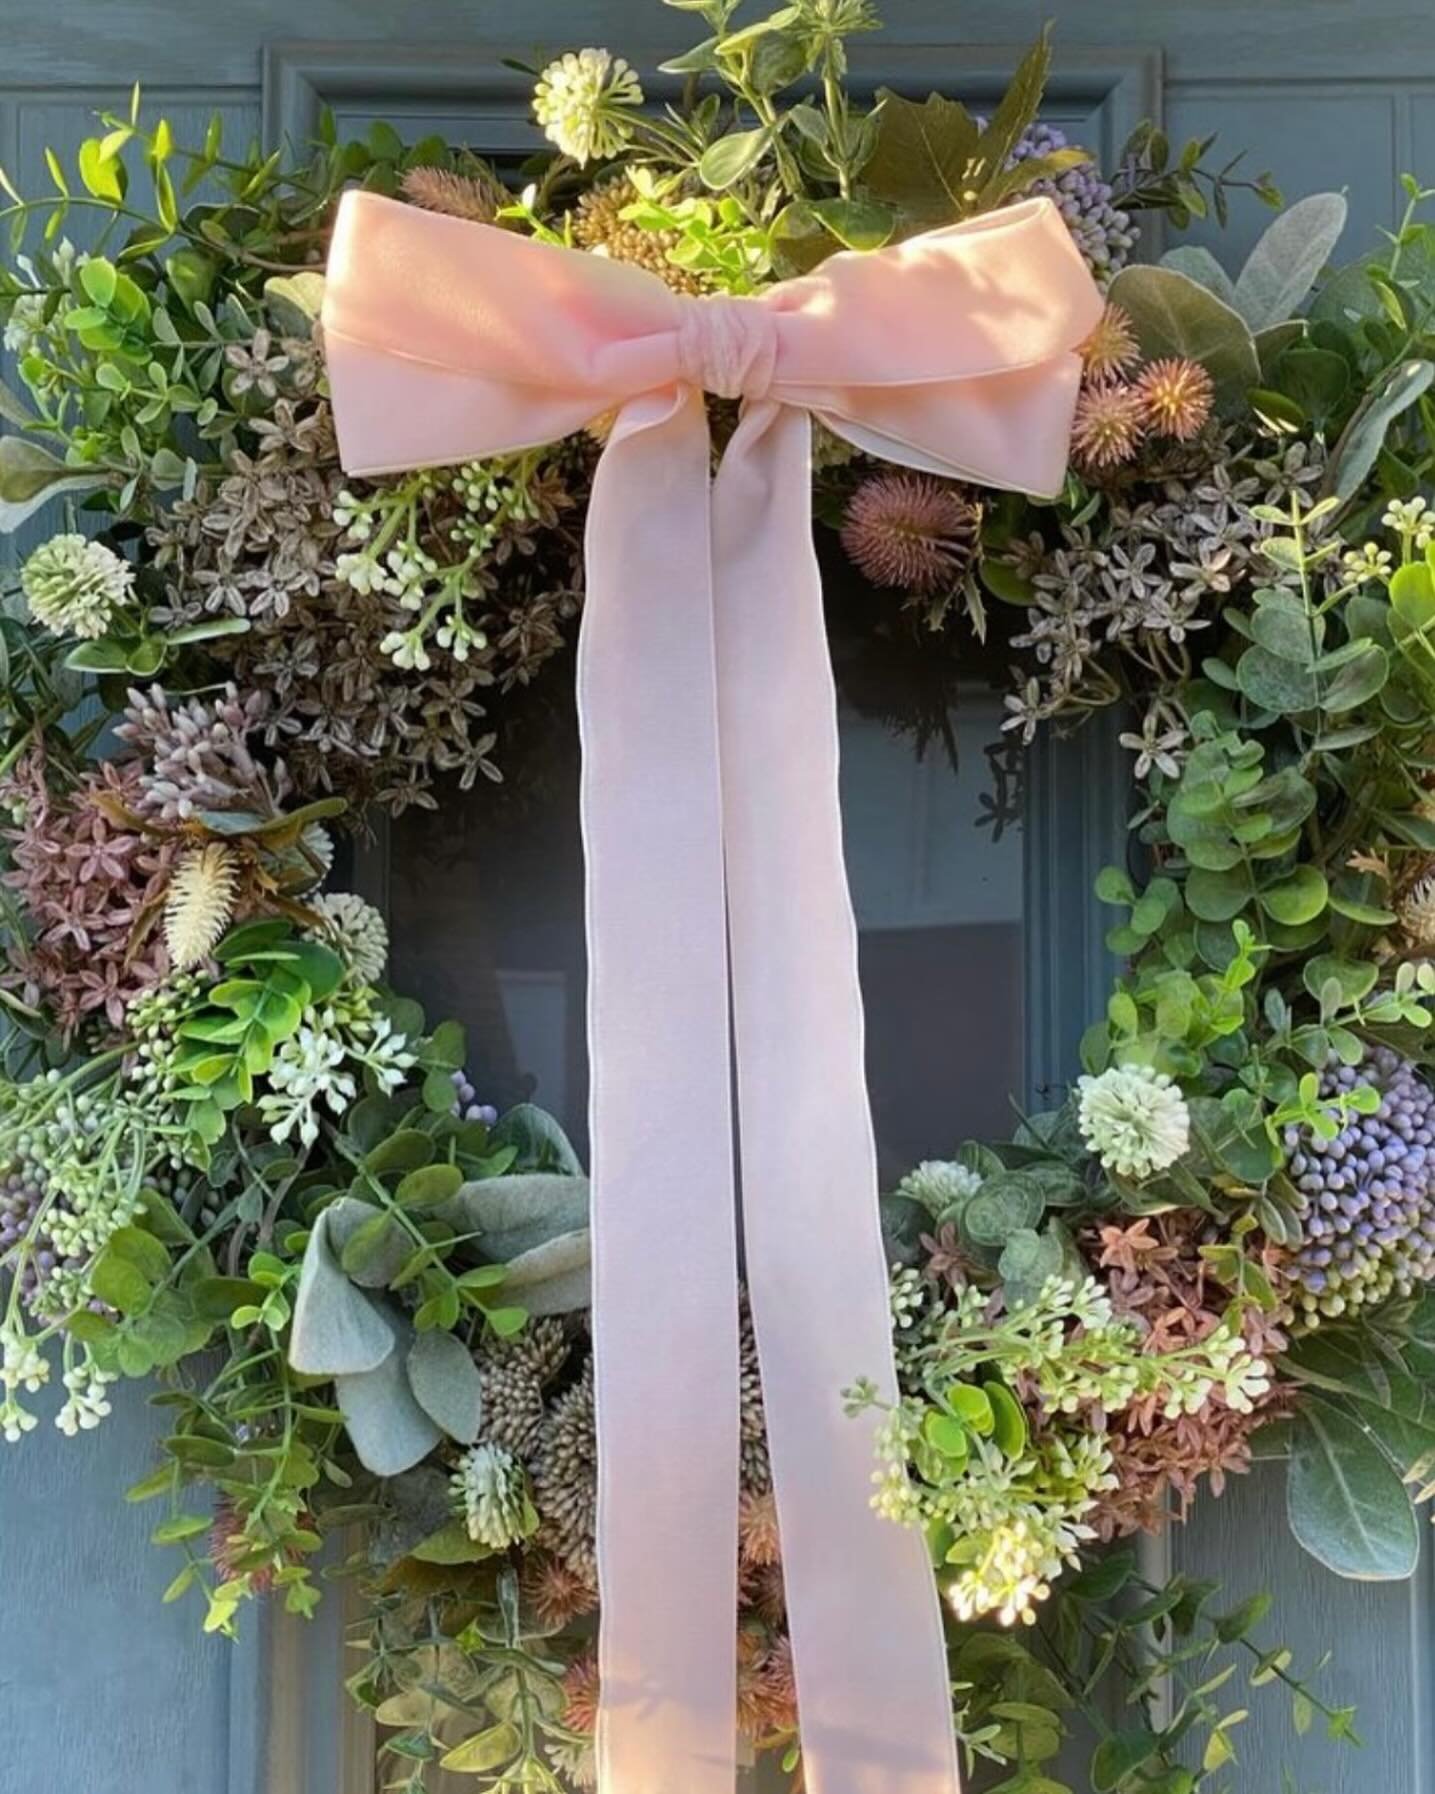 Sunday
Beautiful but blustery day, just back from walking Nelly on the beach and off to start making orders. Love this pic of the Nordic 40cm wreath and bow from @juniperandme_ #sunday #wreaths #springwreaths